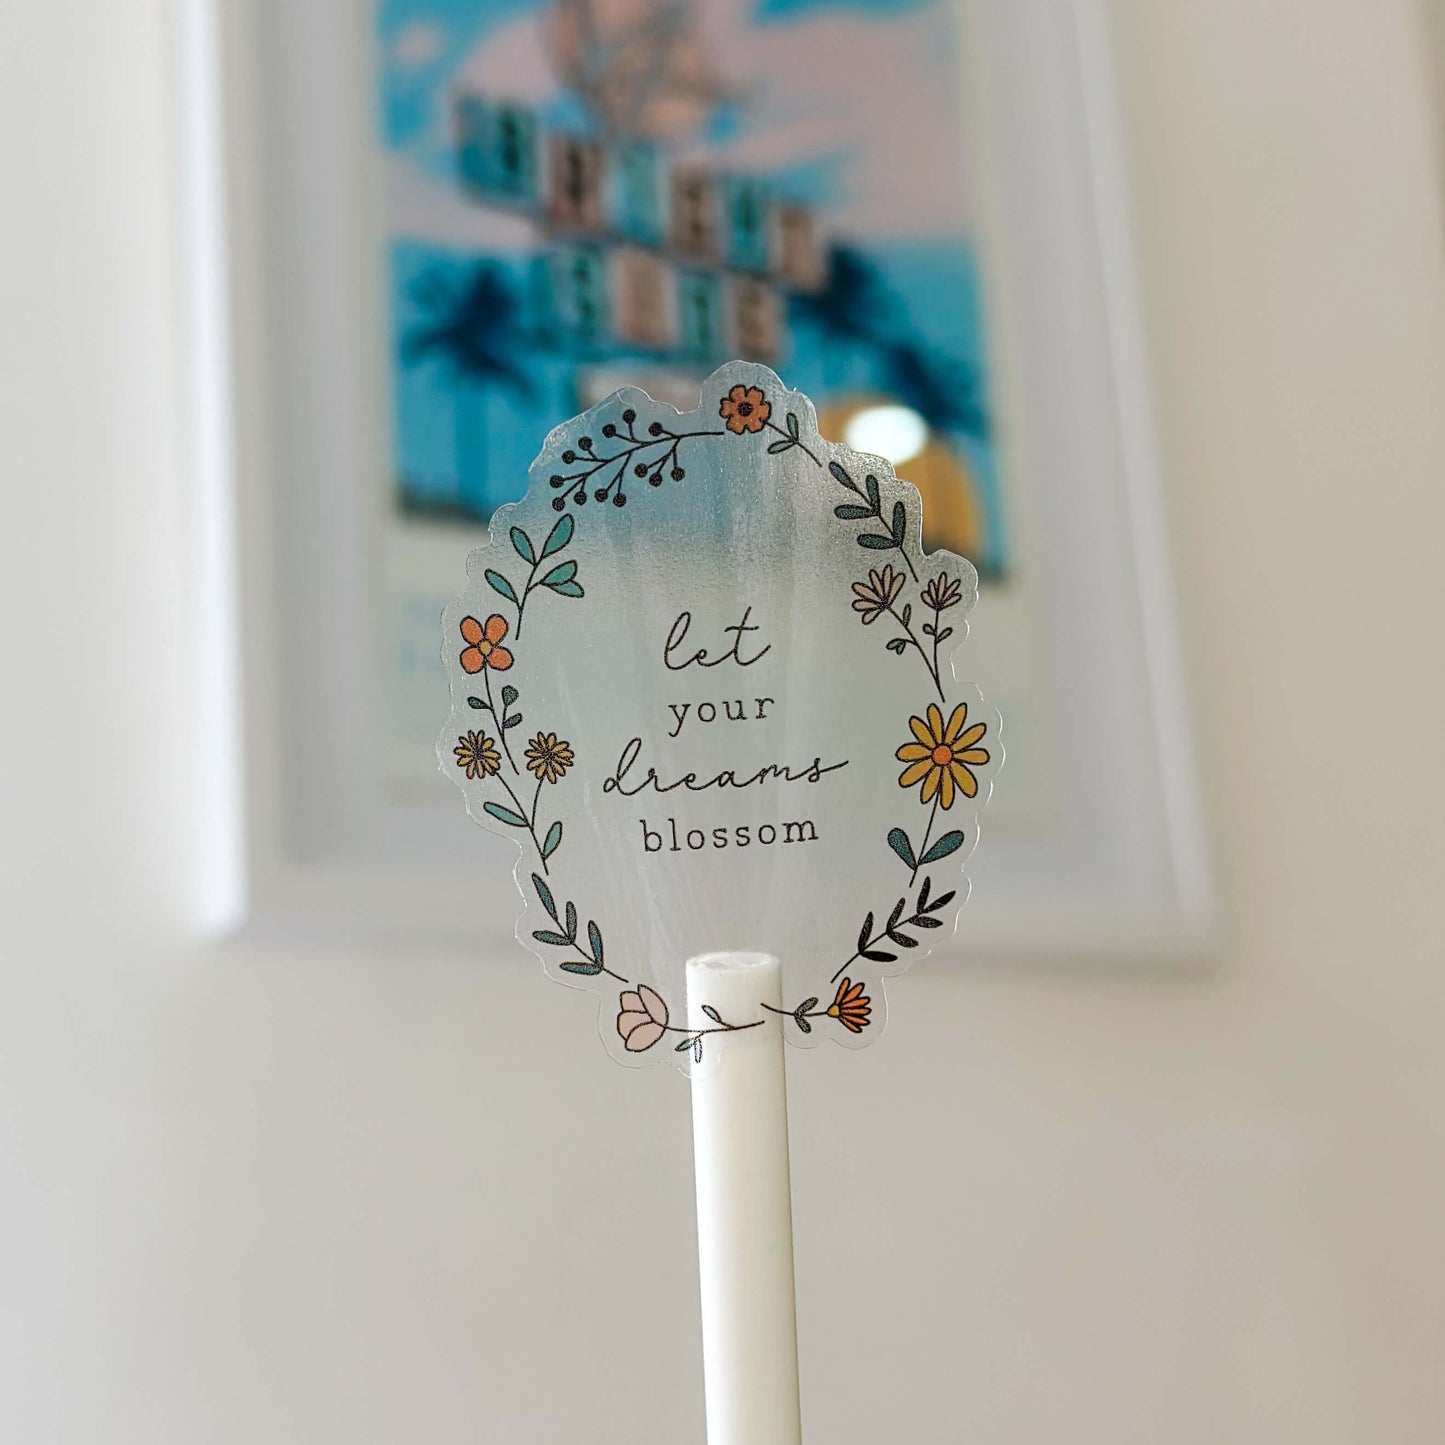 vinyl sticker with flower illustration and the words 'et your dreams blossom;